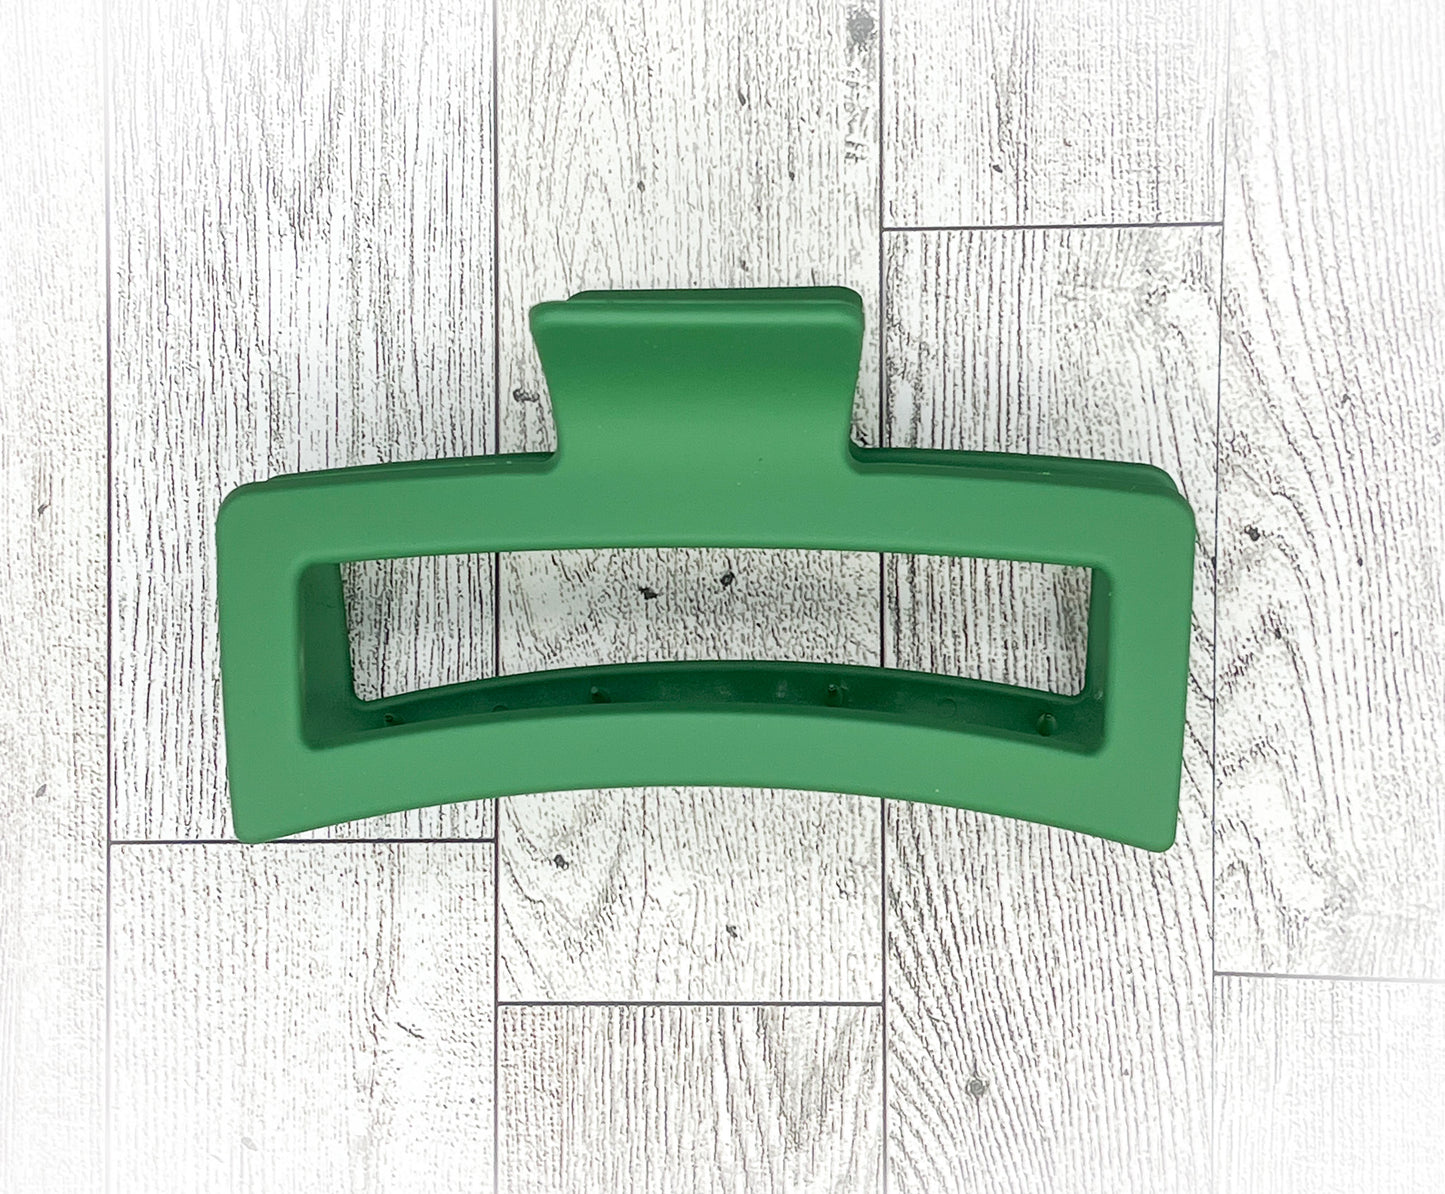 Matte Dark Green Hair Claw Clip - Rectangular shape - 4. 5 inches in length. Great for Braids, twists, long hair, thick hair, and coarse hair.